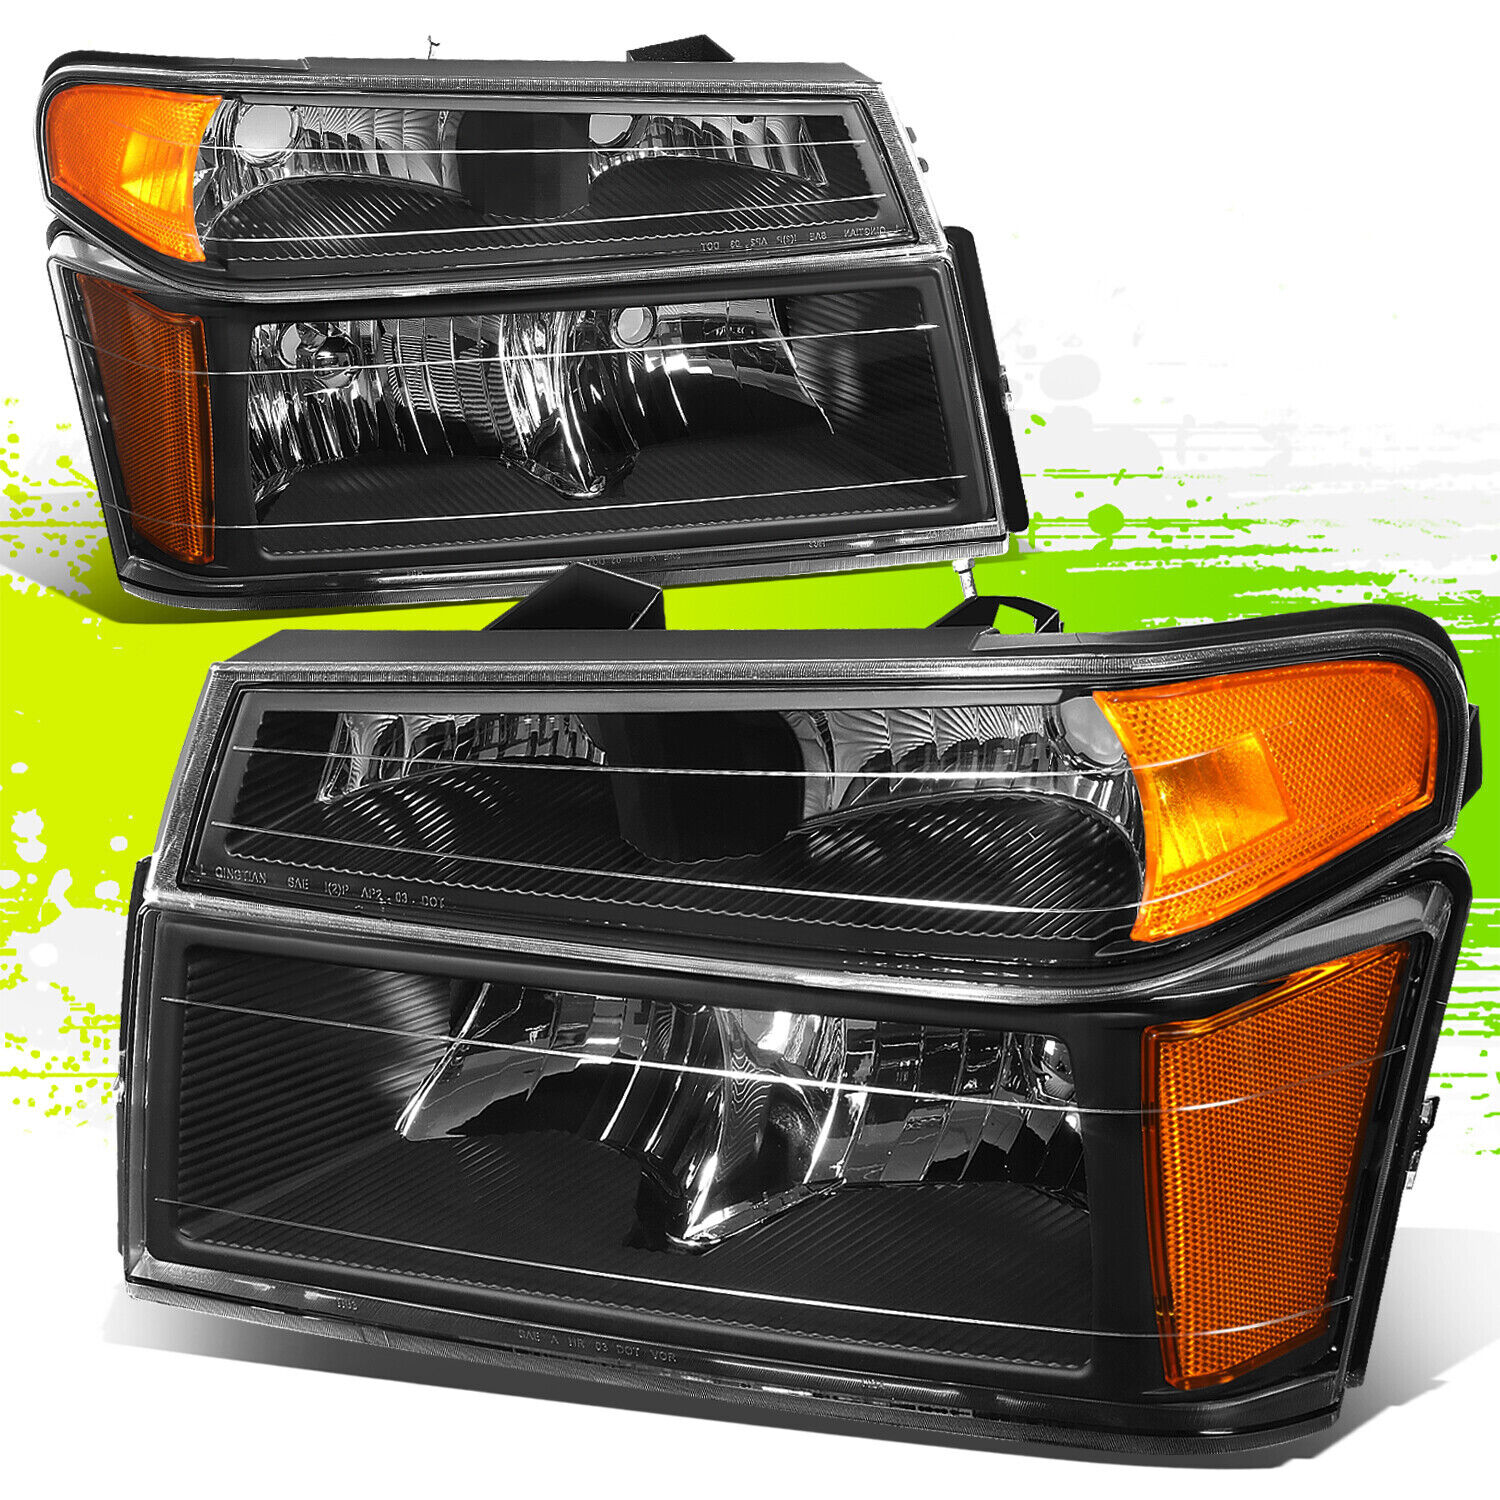 Factory Style Halogen Headlight Lamps for Colorado Canyon 04-12 Black Amber Pair